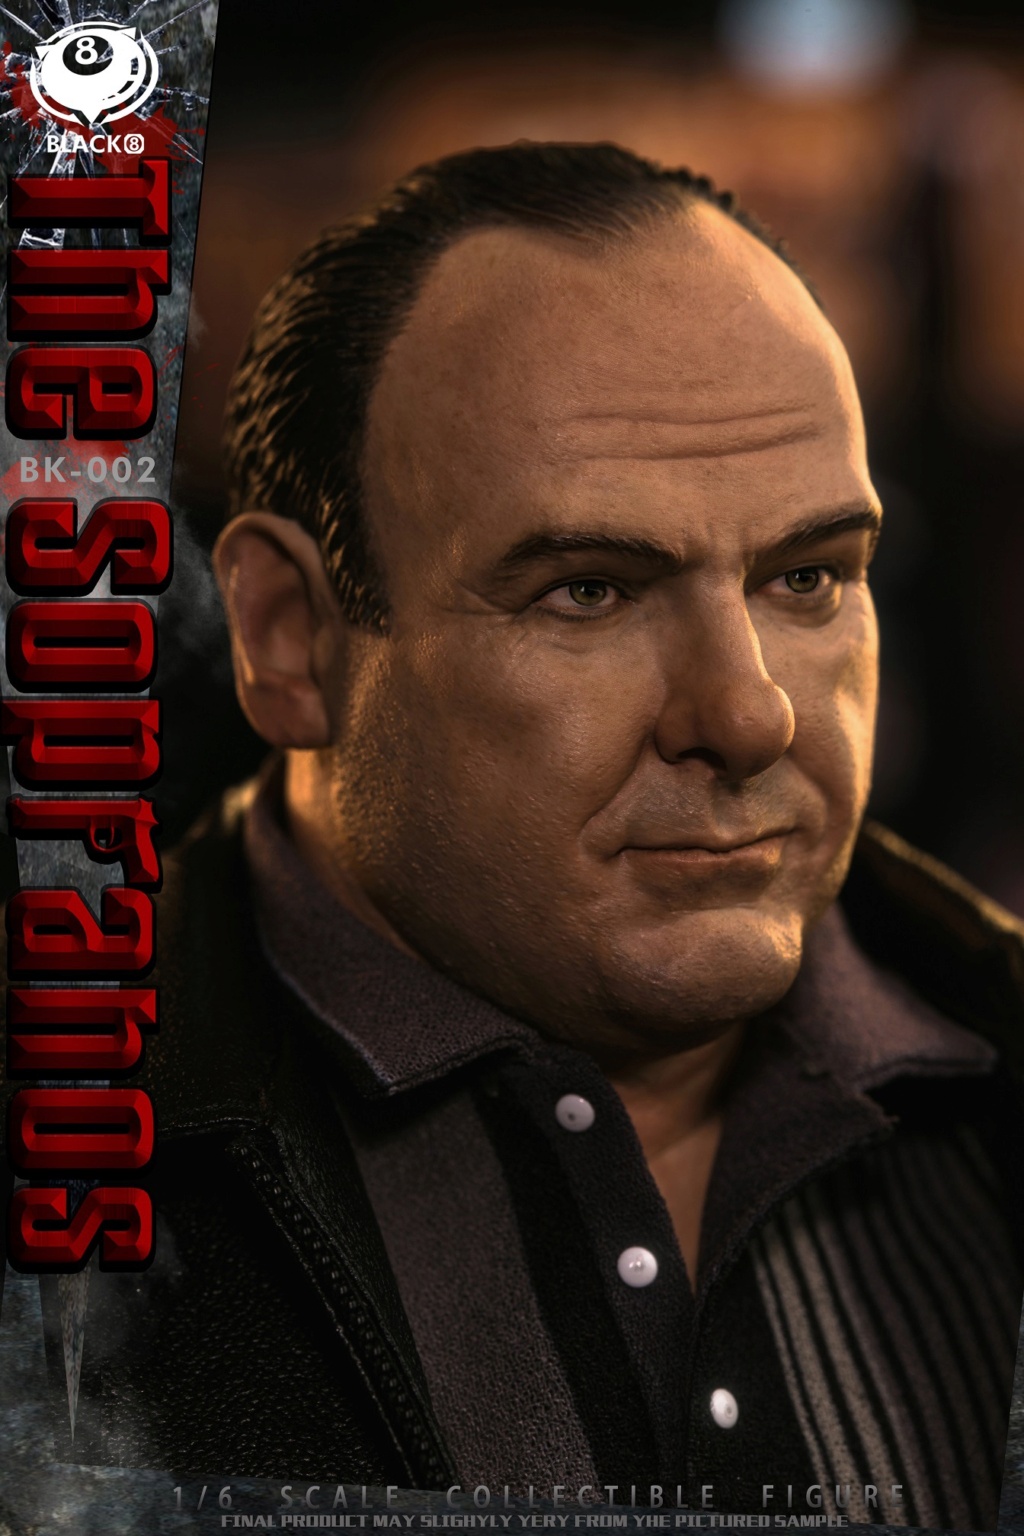 cableTV-based - NEW PRODUCT: BLACK 8 STUDIO: 1/6 "The Sopranos" Collection Doll#BK-002 16111011